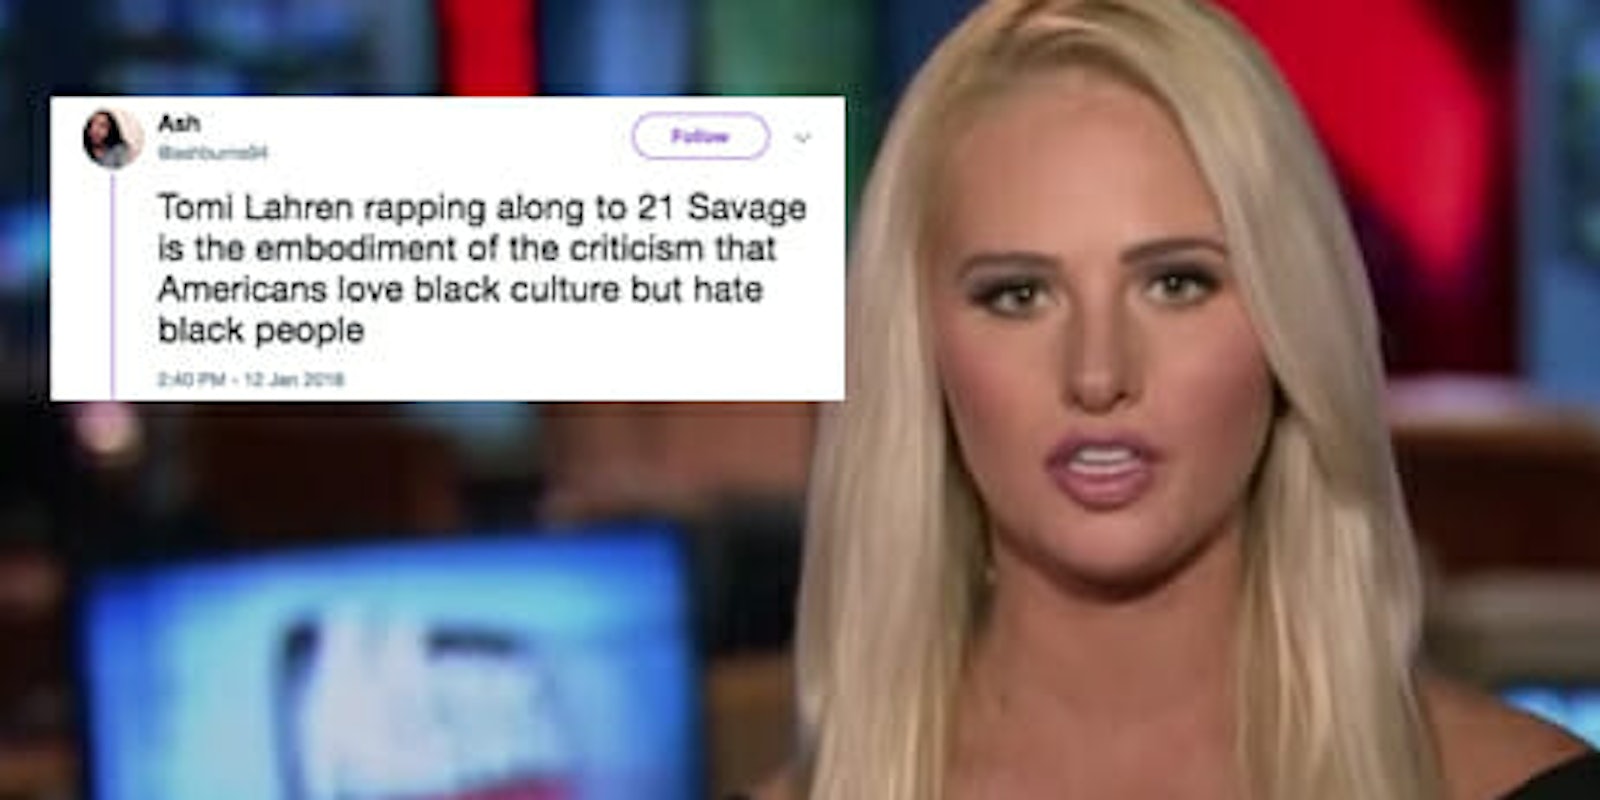 Twitter slammed Tomi Lahren after she posted an Instagram story of herself lip syncing along to rapper 21 Savage.